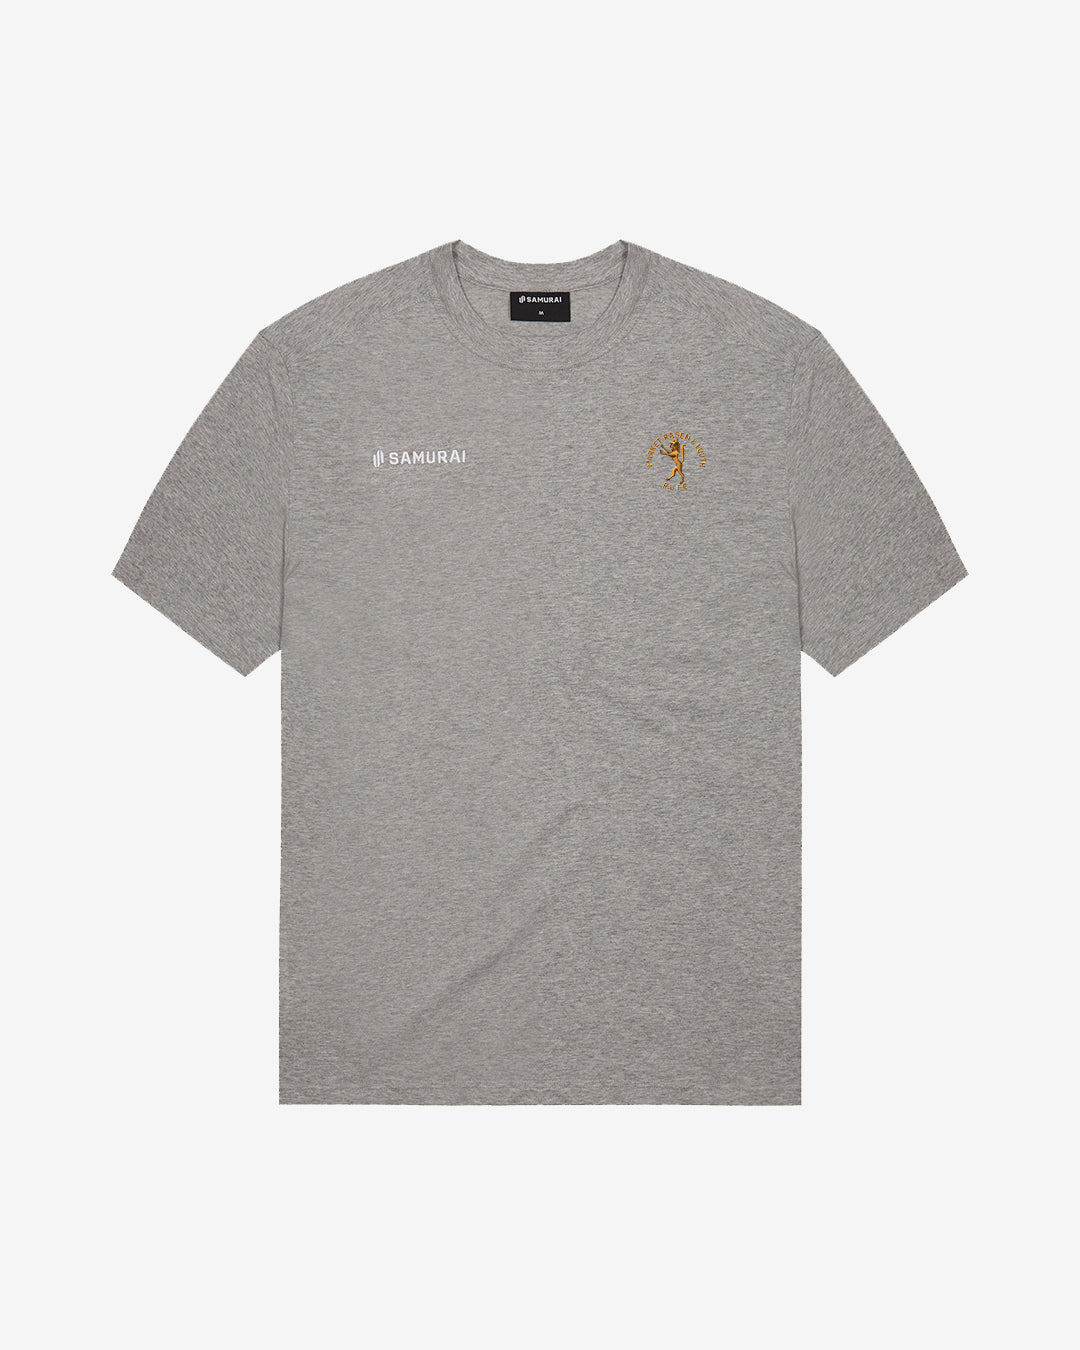 Market Rasen and Louth RUFC - EP:0110 - Cotton Touch Tee - Grey